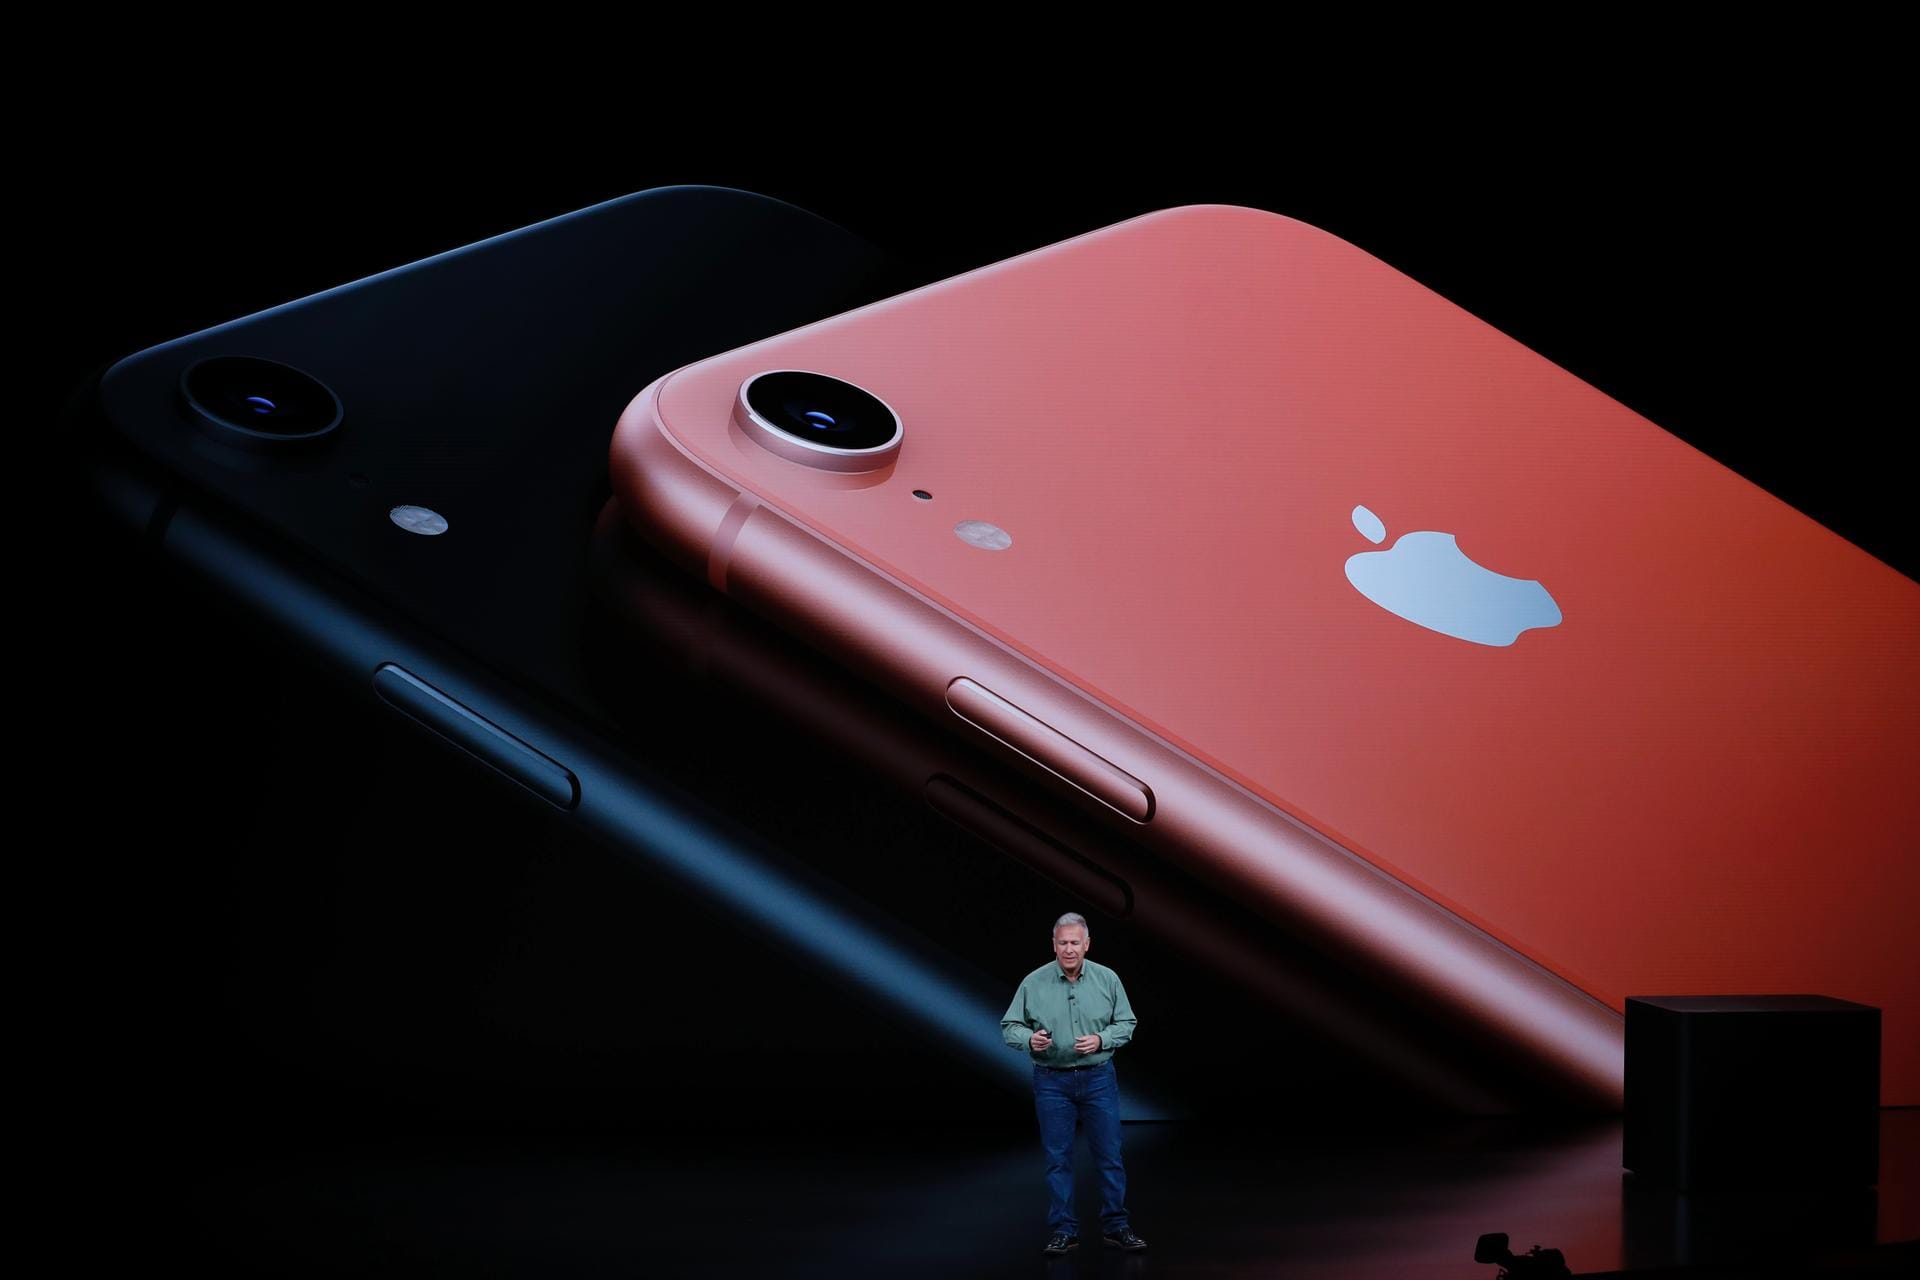 Schiller Senior Vice President, Worldwide Marketing of Apple, speaks about the new Apple iPhone XR at an Apple Inc product launch in Cupertino